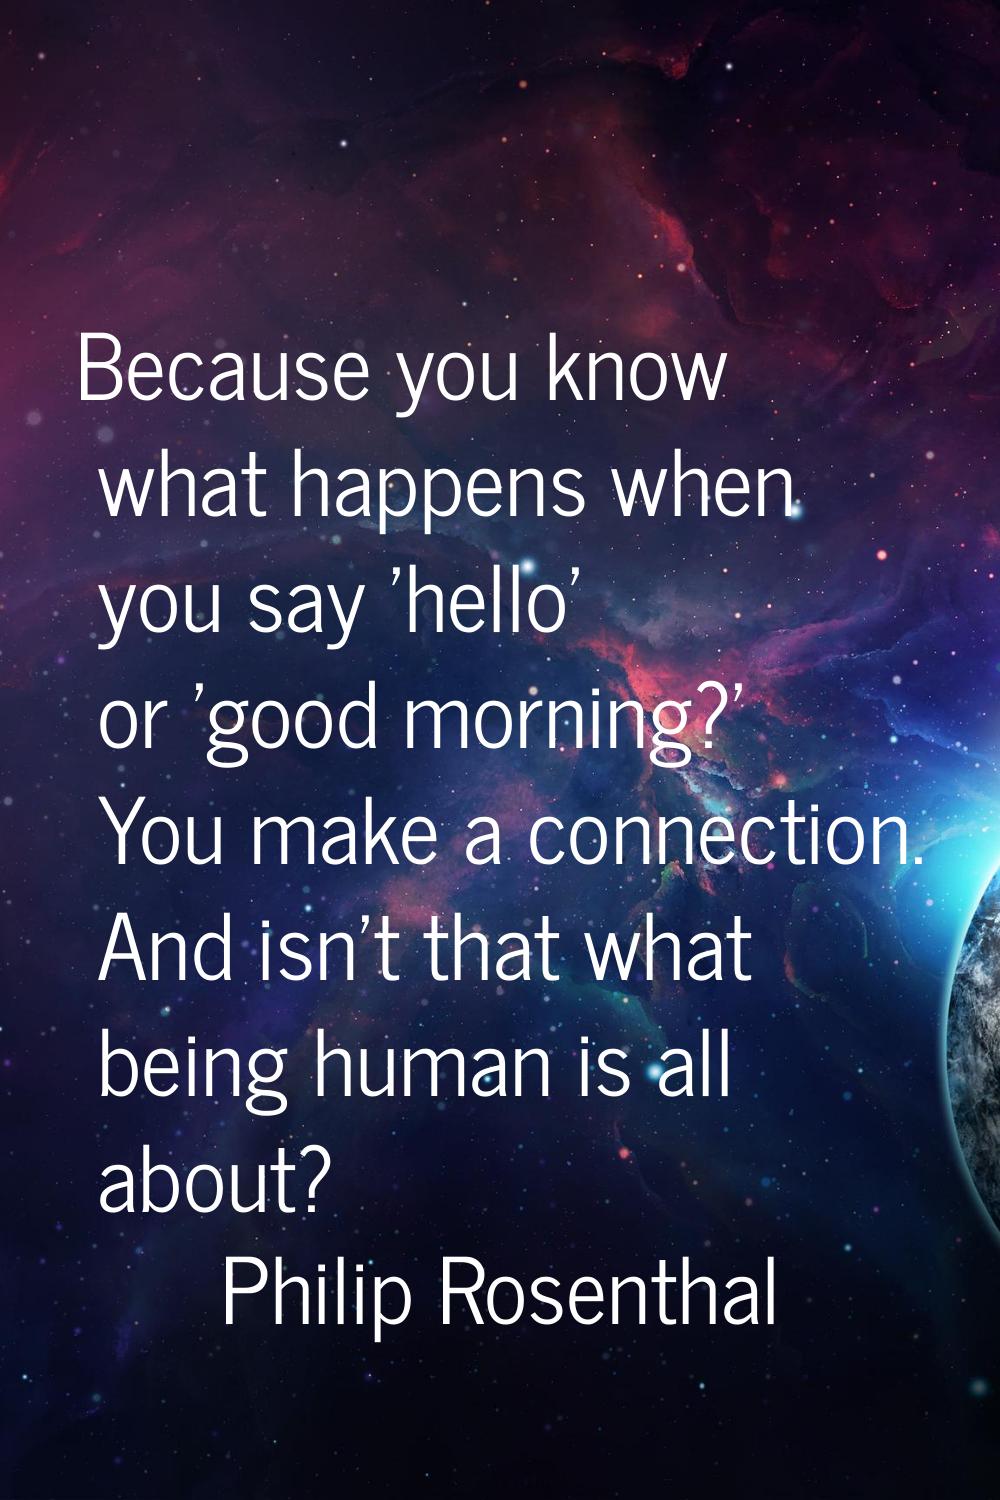 Because you know what happens when you say 'hello' or 'good morning?' You make a connection. And is